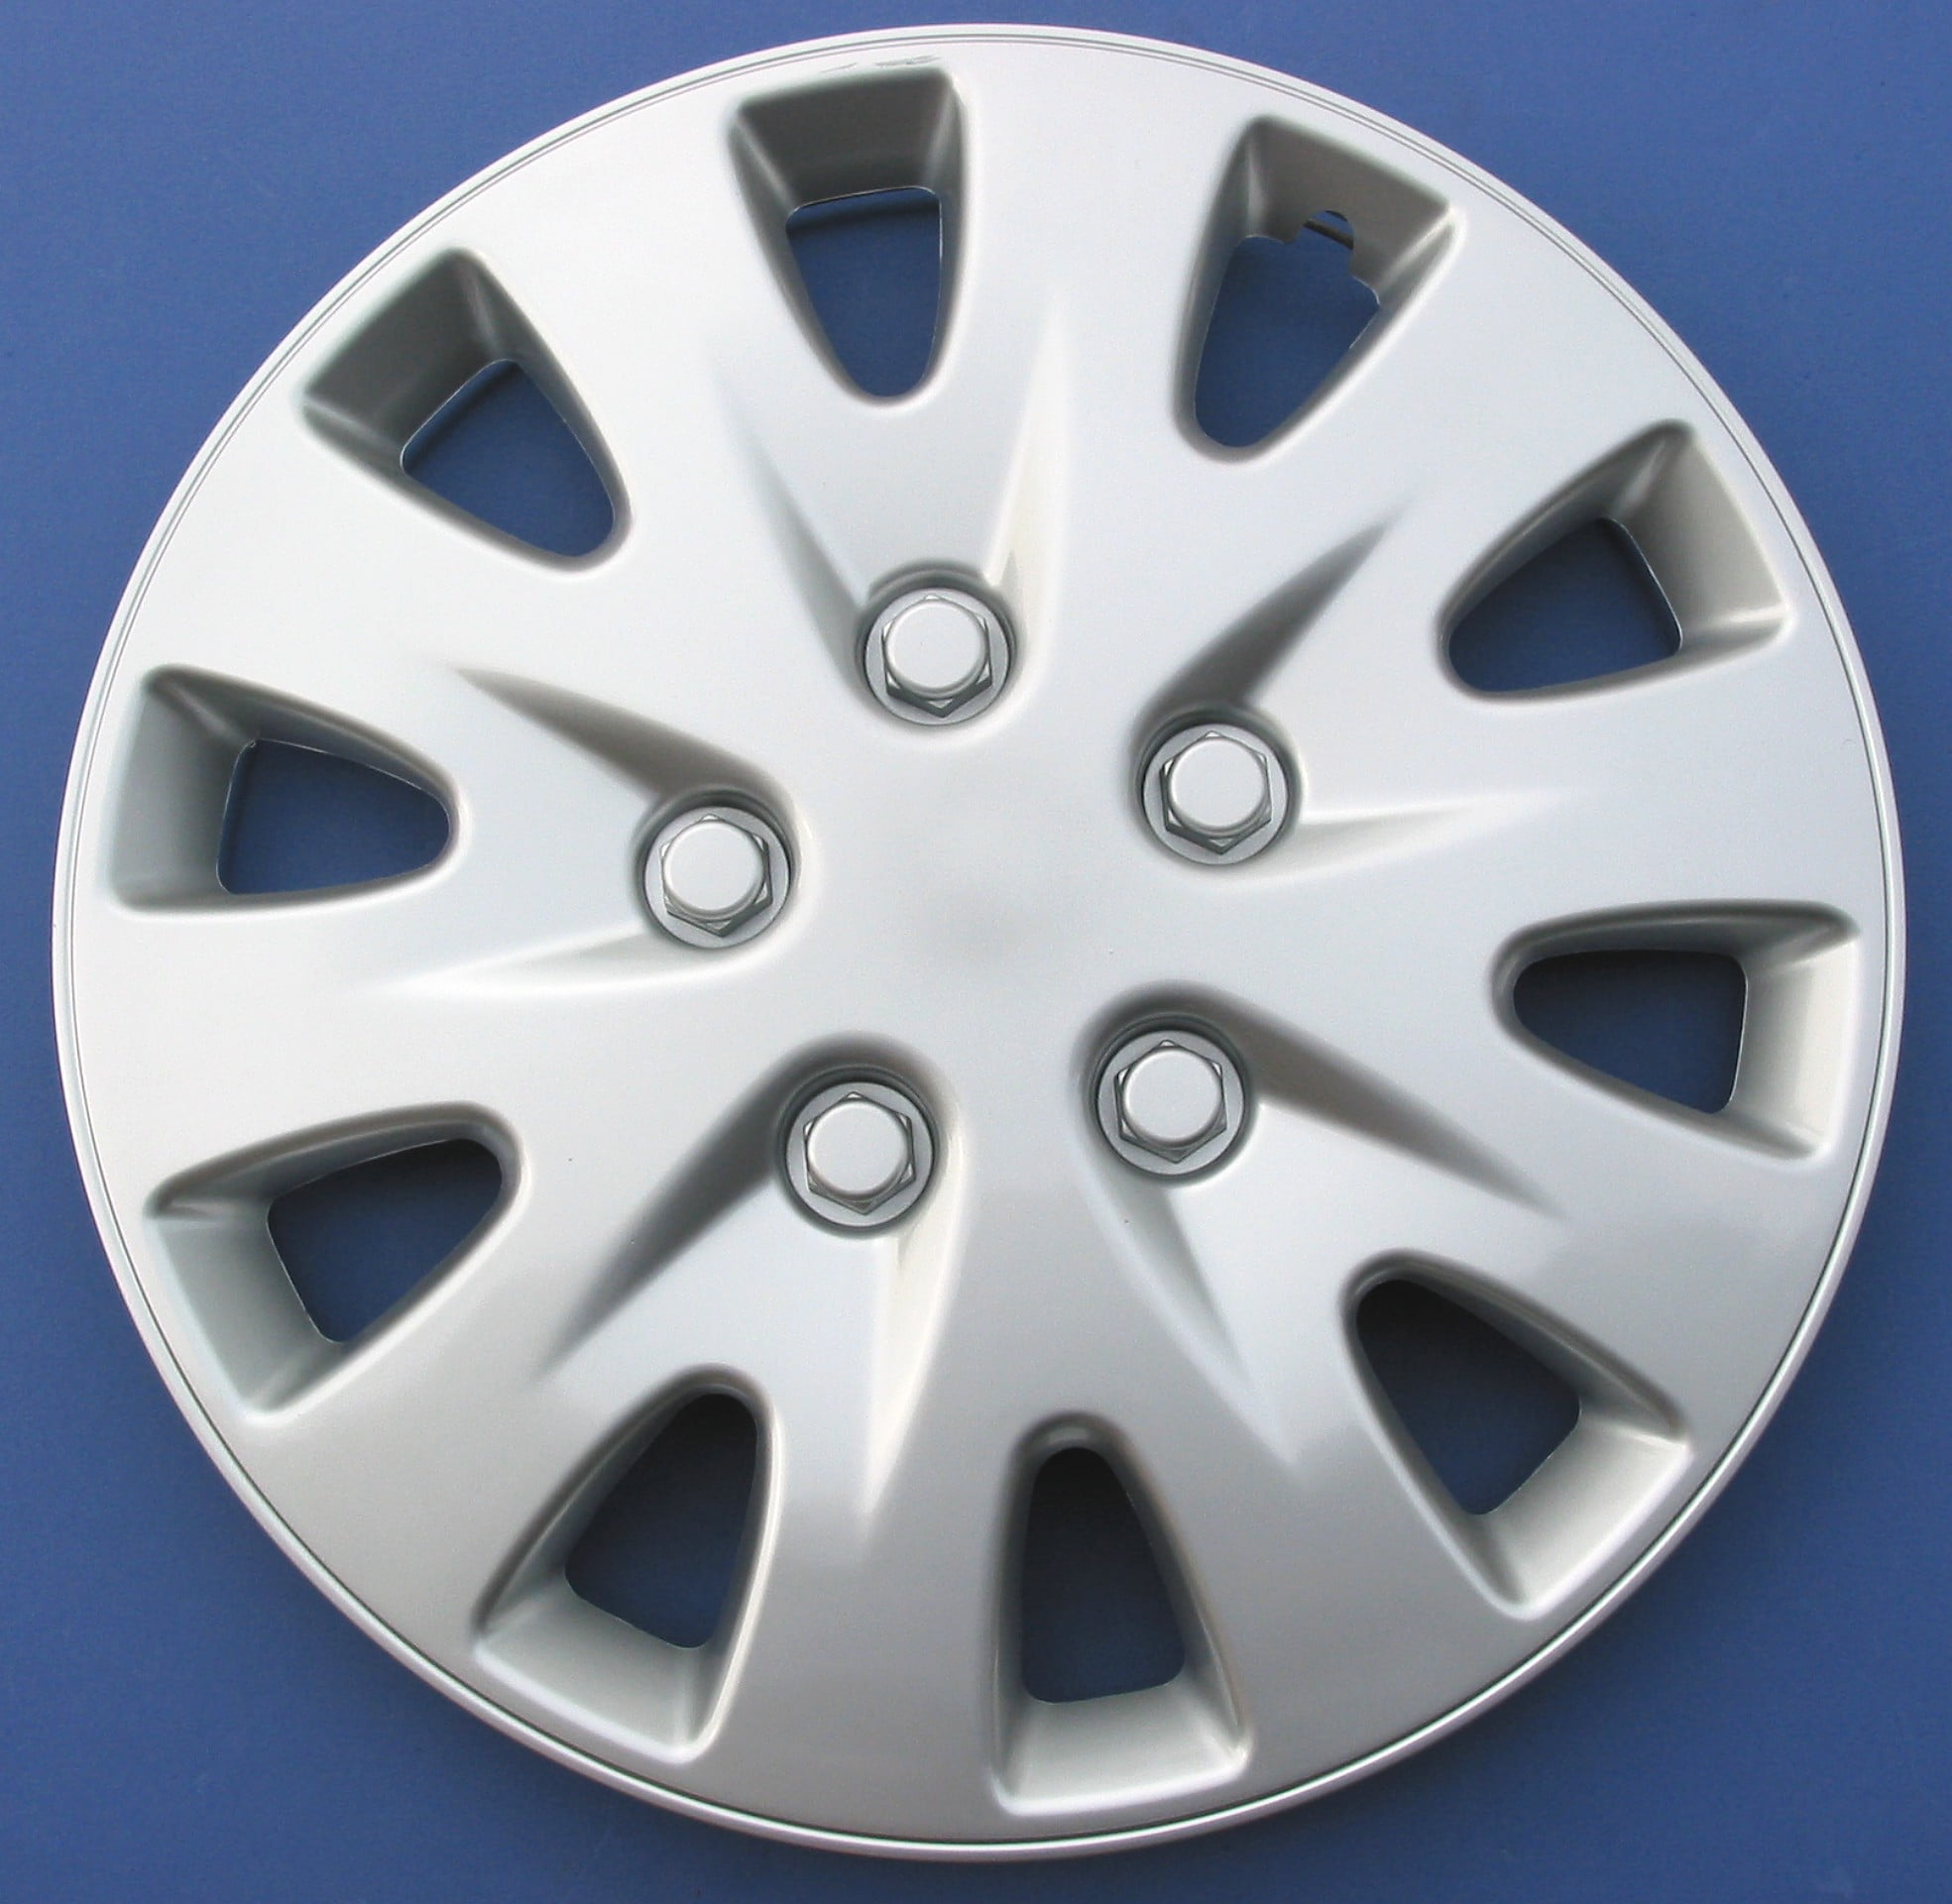 16-in Wheel Cover, Silver Alloy Finish, Auto Drive Brand, ABS Plastic  Material, Mfg Part No. KT321-16SL 